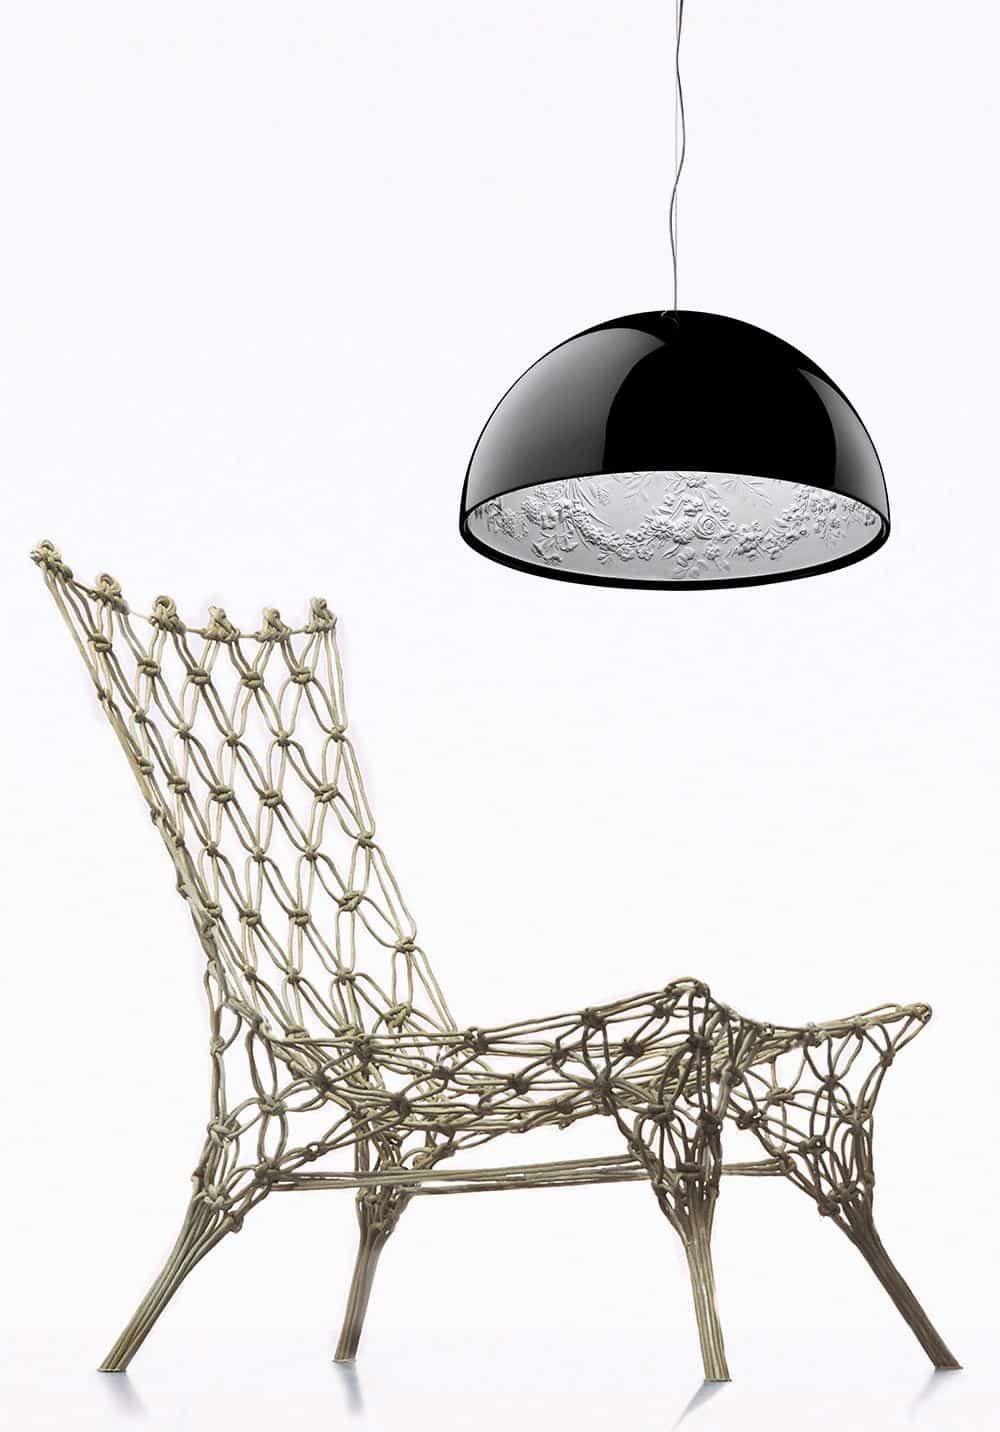 The wonders Marcel Wanders Studio created for Louis Vuitton Objet Nomades